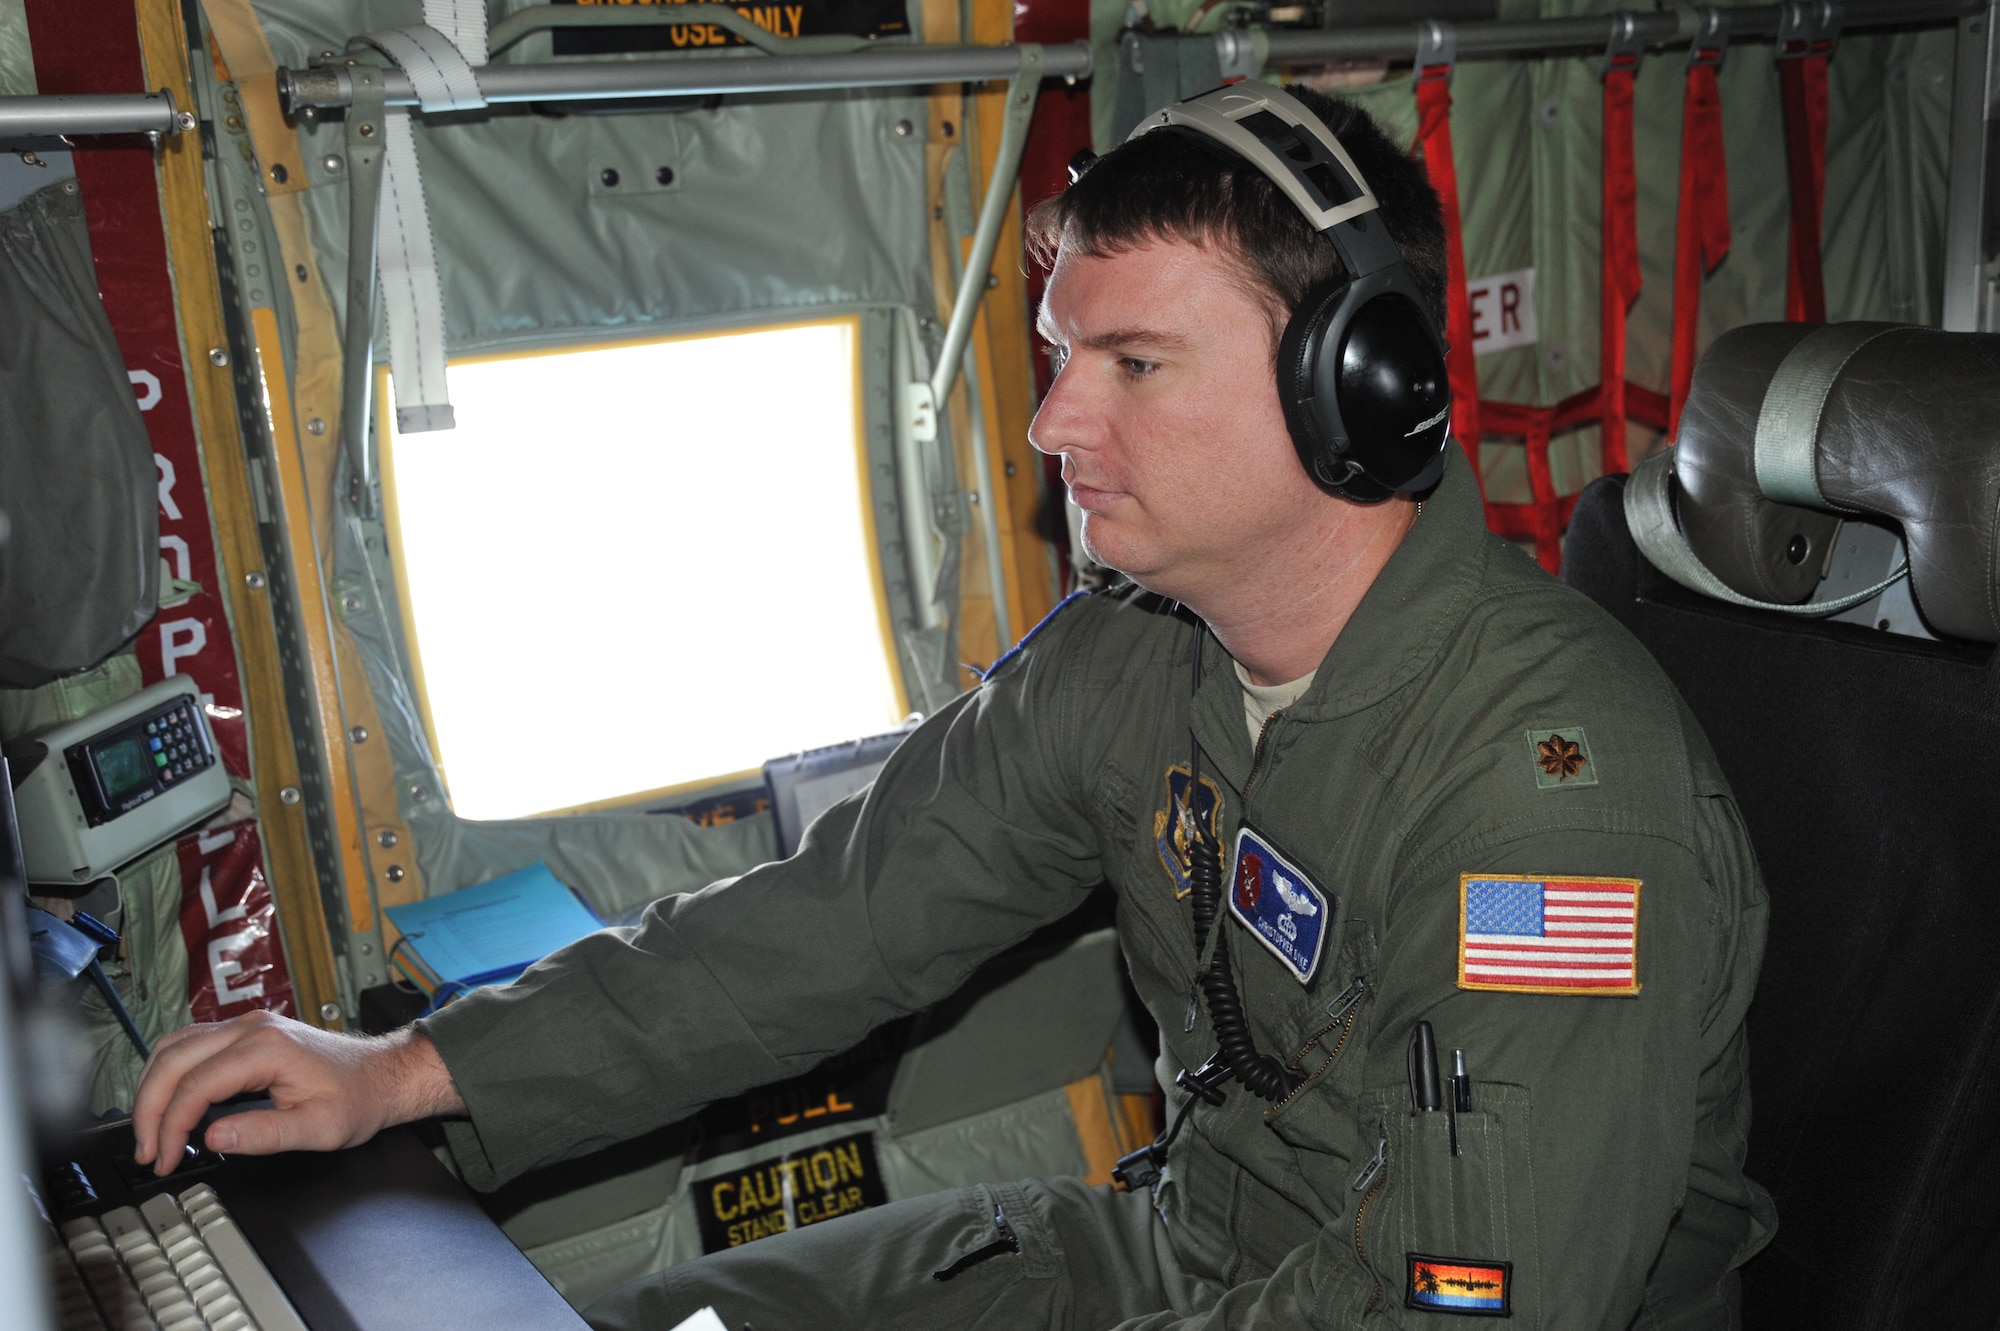 Capt. Christopher Dyke, an aerial weather reconnaissance officer for the 53rd Weather Reconnaissance Squadron, was serving in the active-duty Air Force in 2005. At the time, he was living on base in the training student dormitories while going through the Weather Officer Course at Keesler Air Force Base, Mississippi. (U.S. Air Force photo/Maj. Marnee A.C. Losurdo)